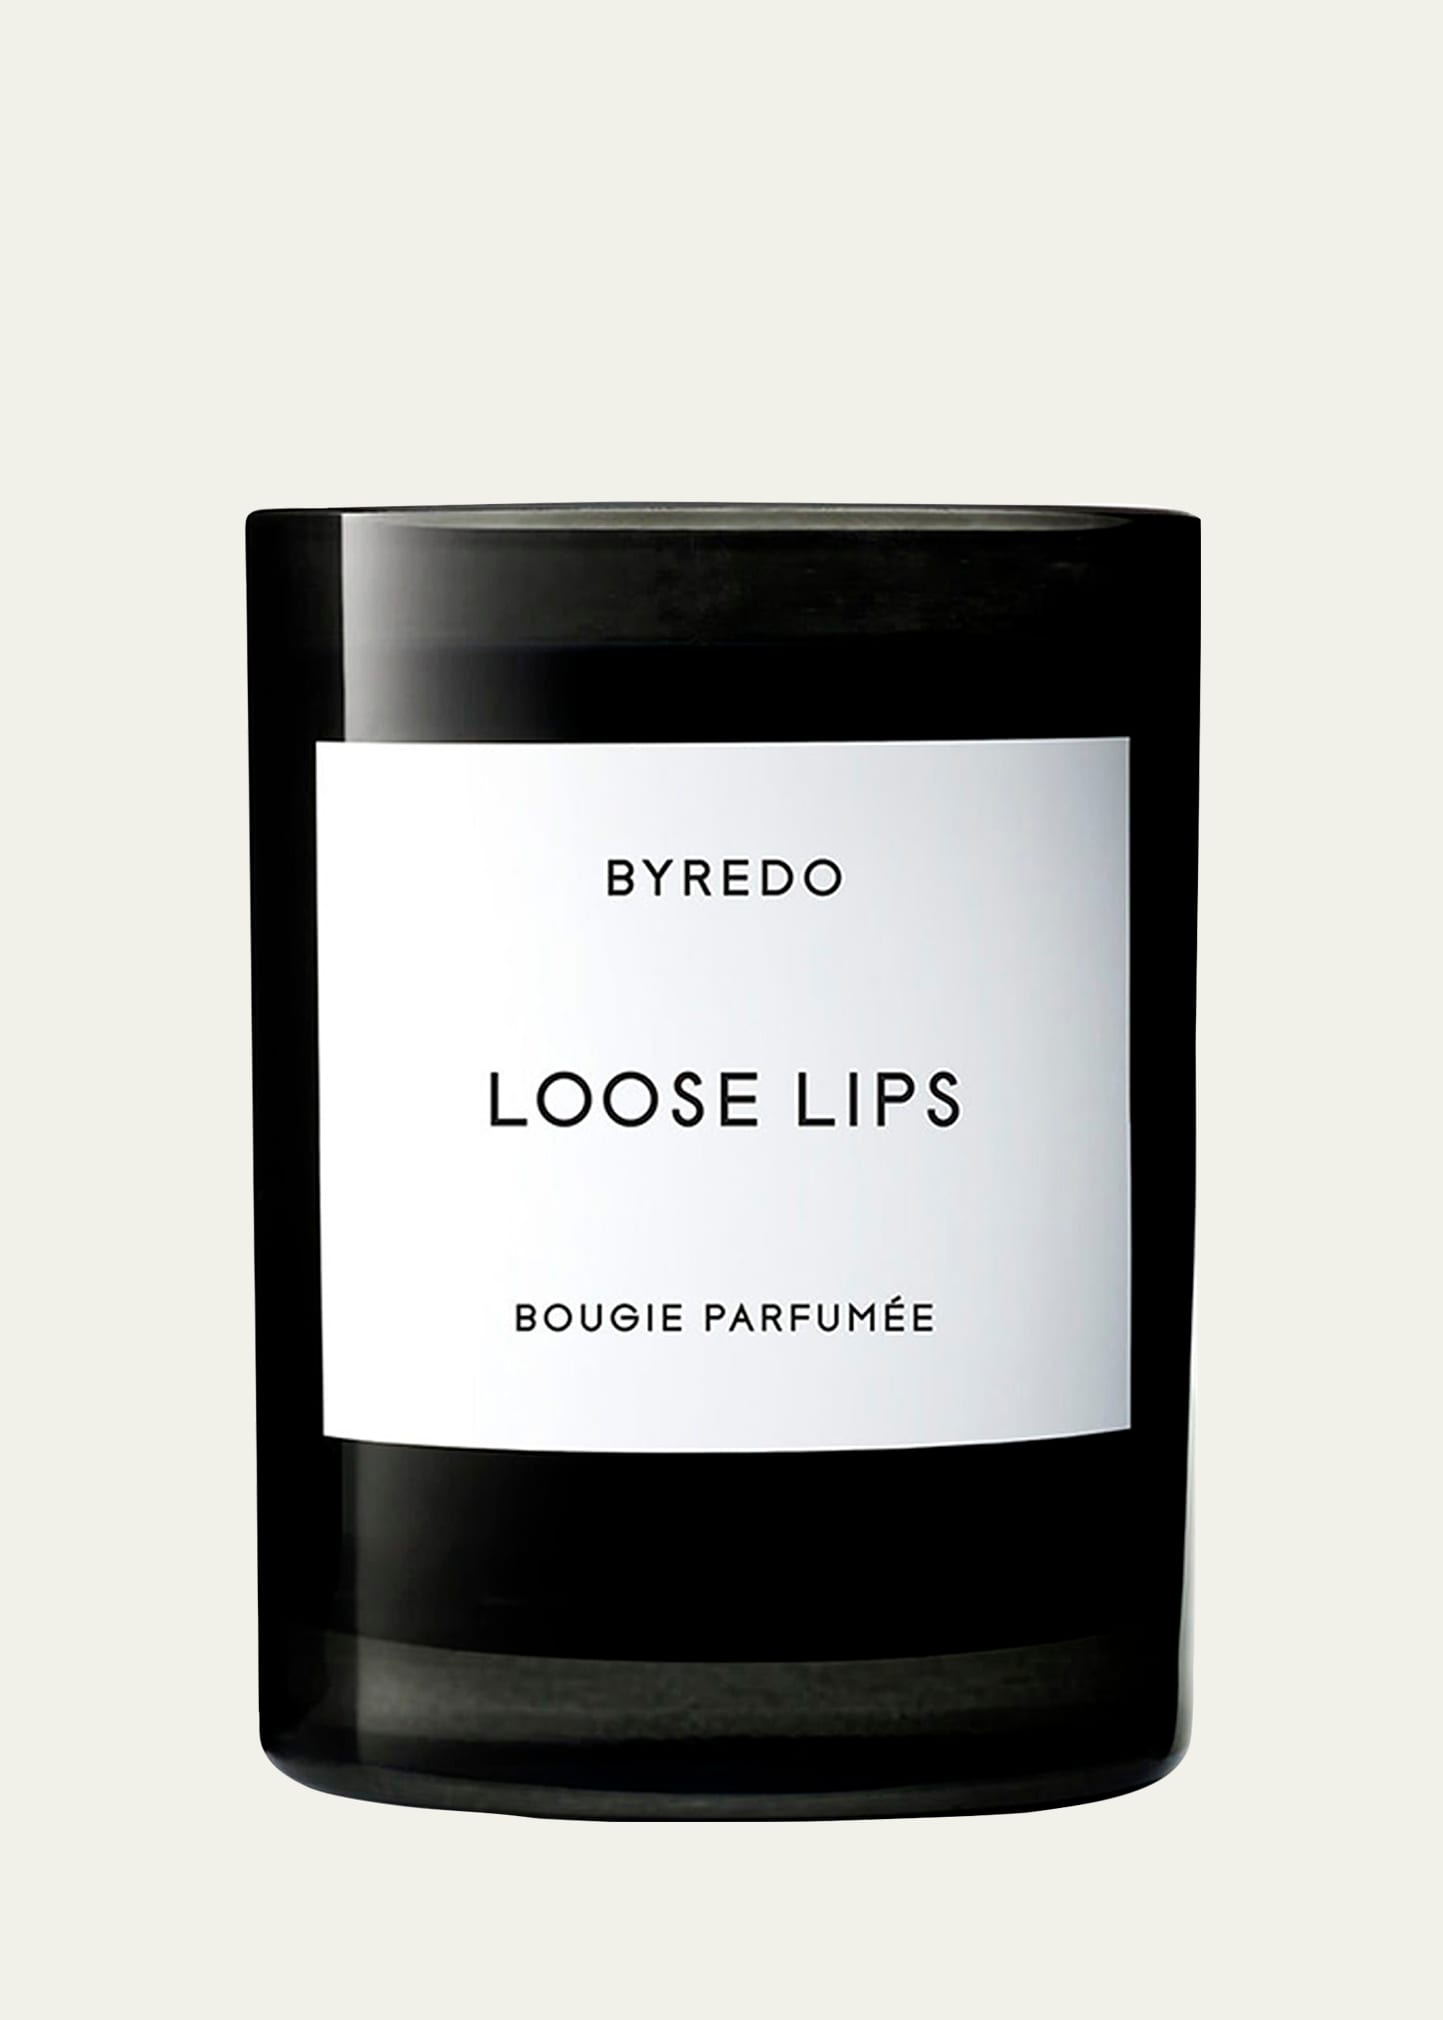 8.5 oz. Loose Lips Bougie Parfumee Scented Candle